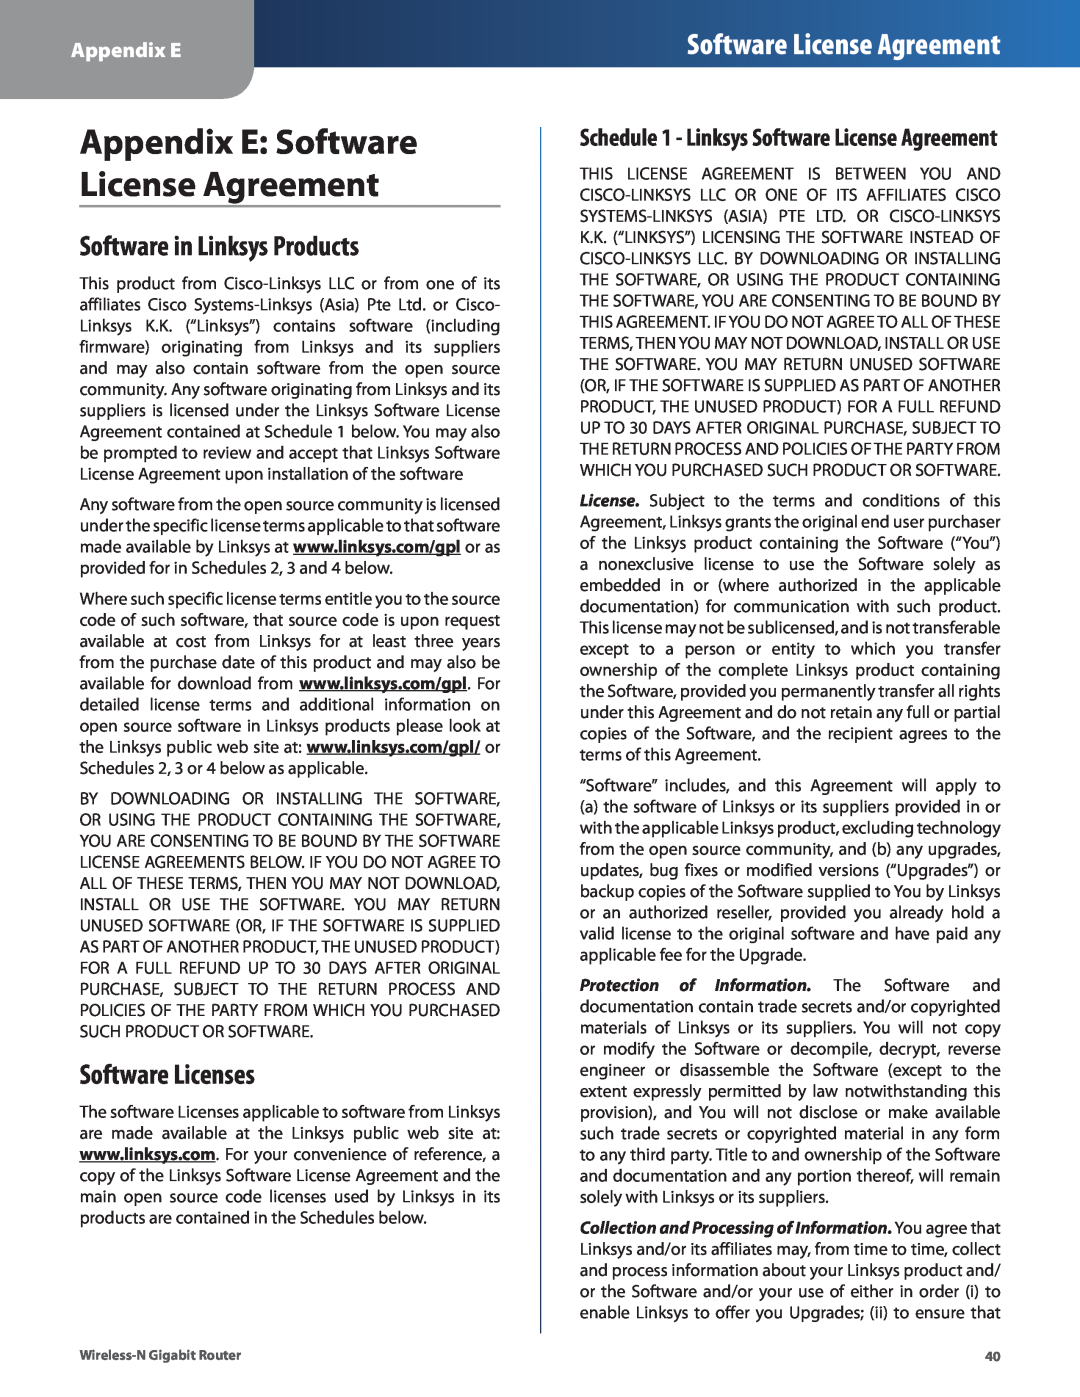 Linksys WRT310N manual Appendix E Software License Agreement, Software in Linksys Products, Software Licenses 